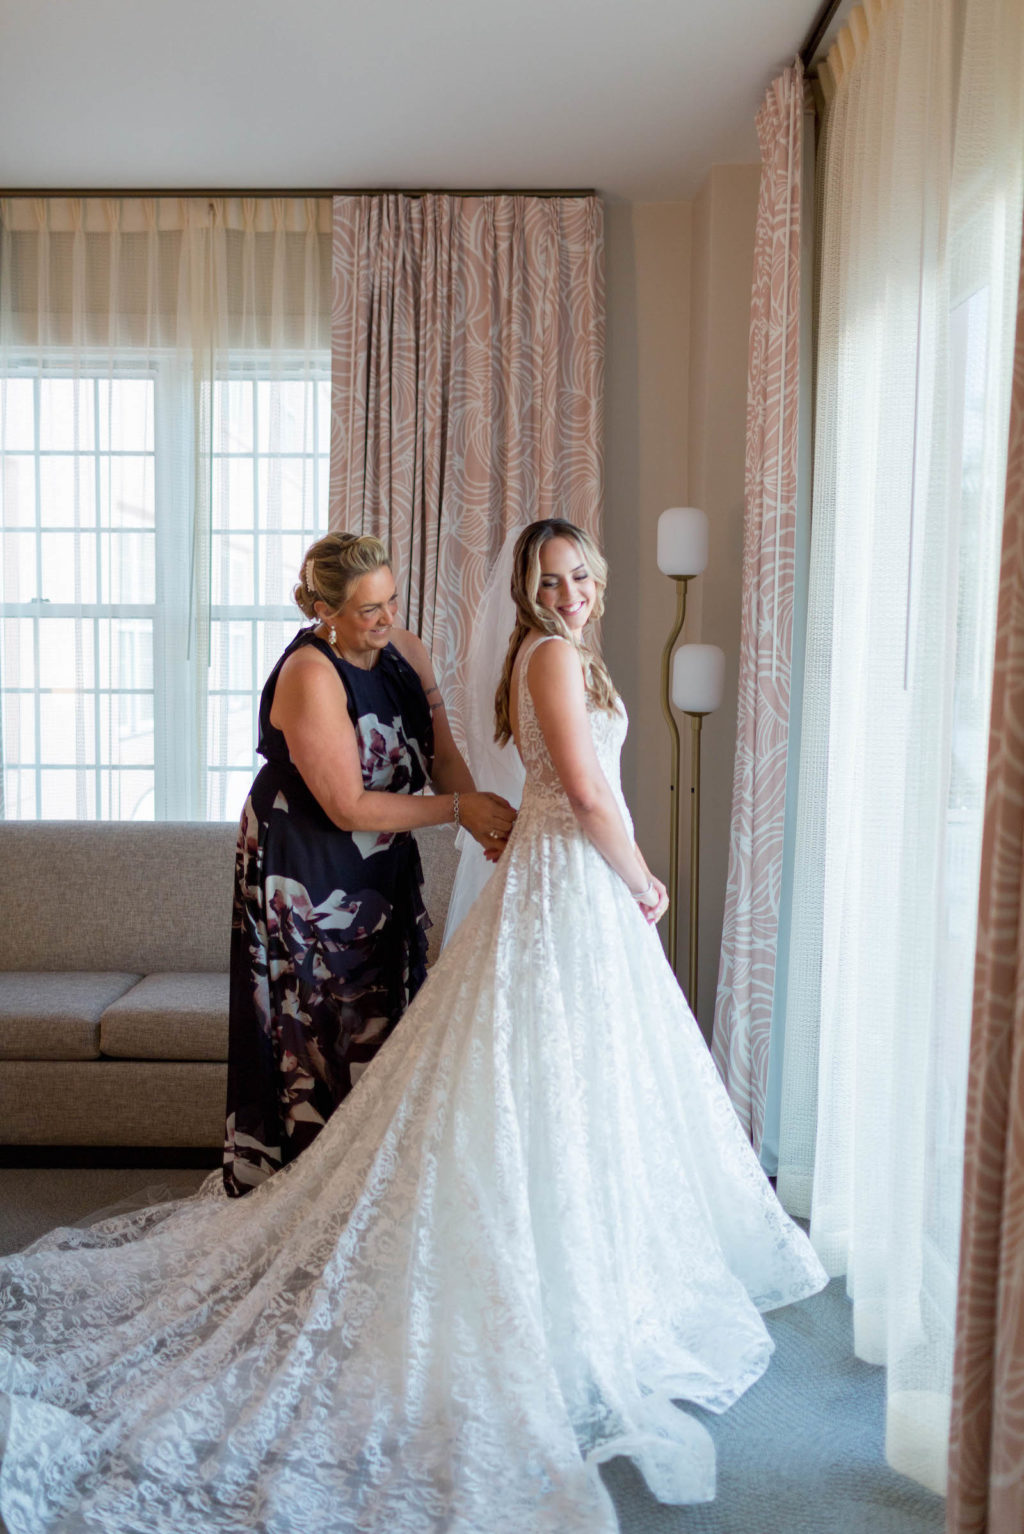 Bride Getting Dressed and Ready with Mother of the Bride | Monique Lhuillier Designer Wedding Dress A Line Ballgown Lace Bridal Gown